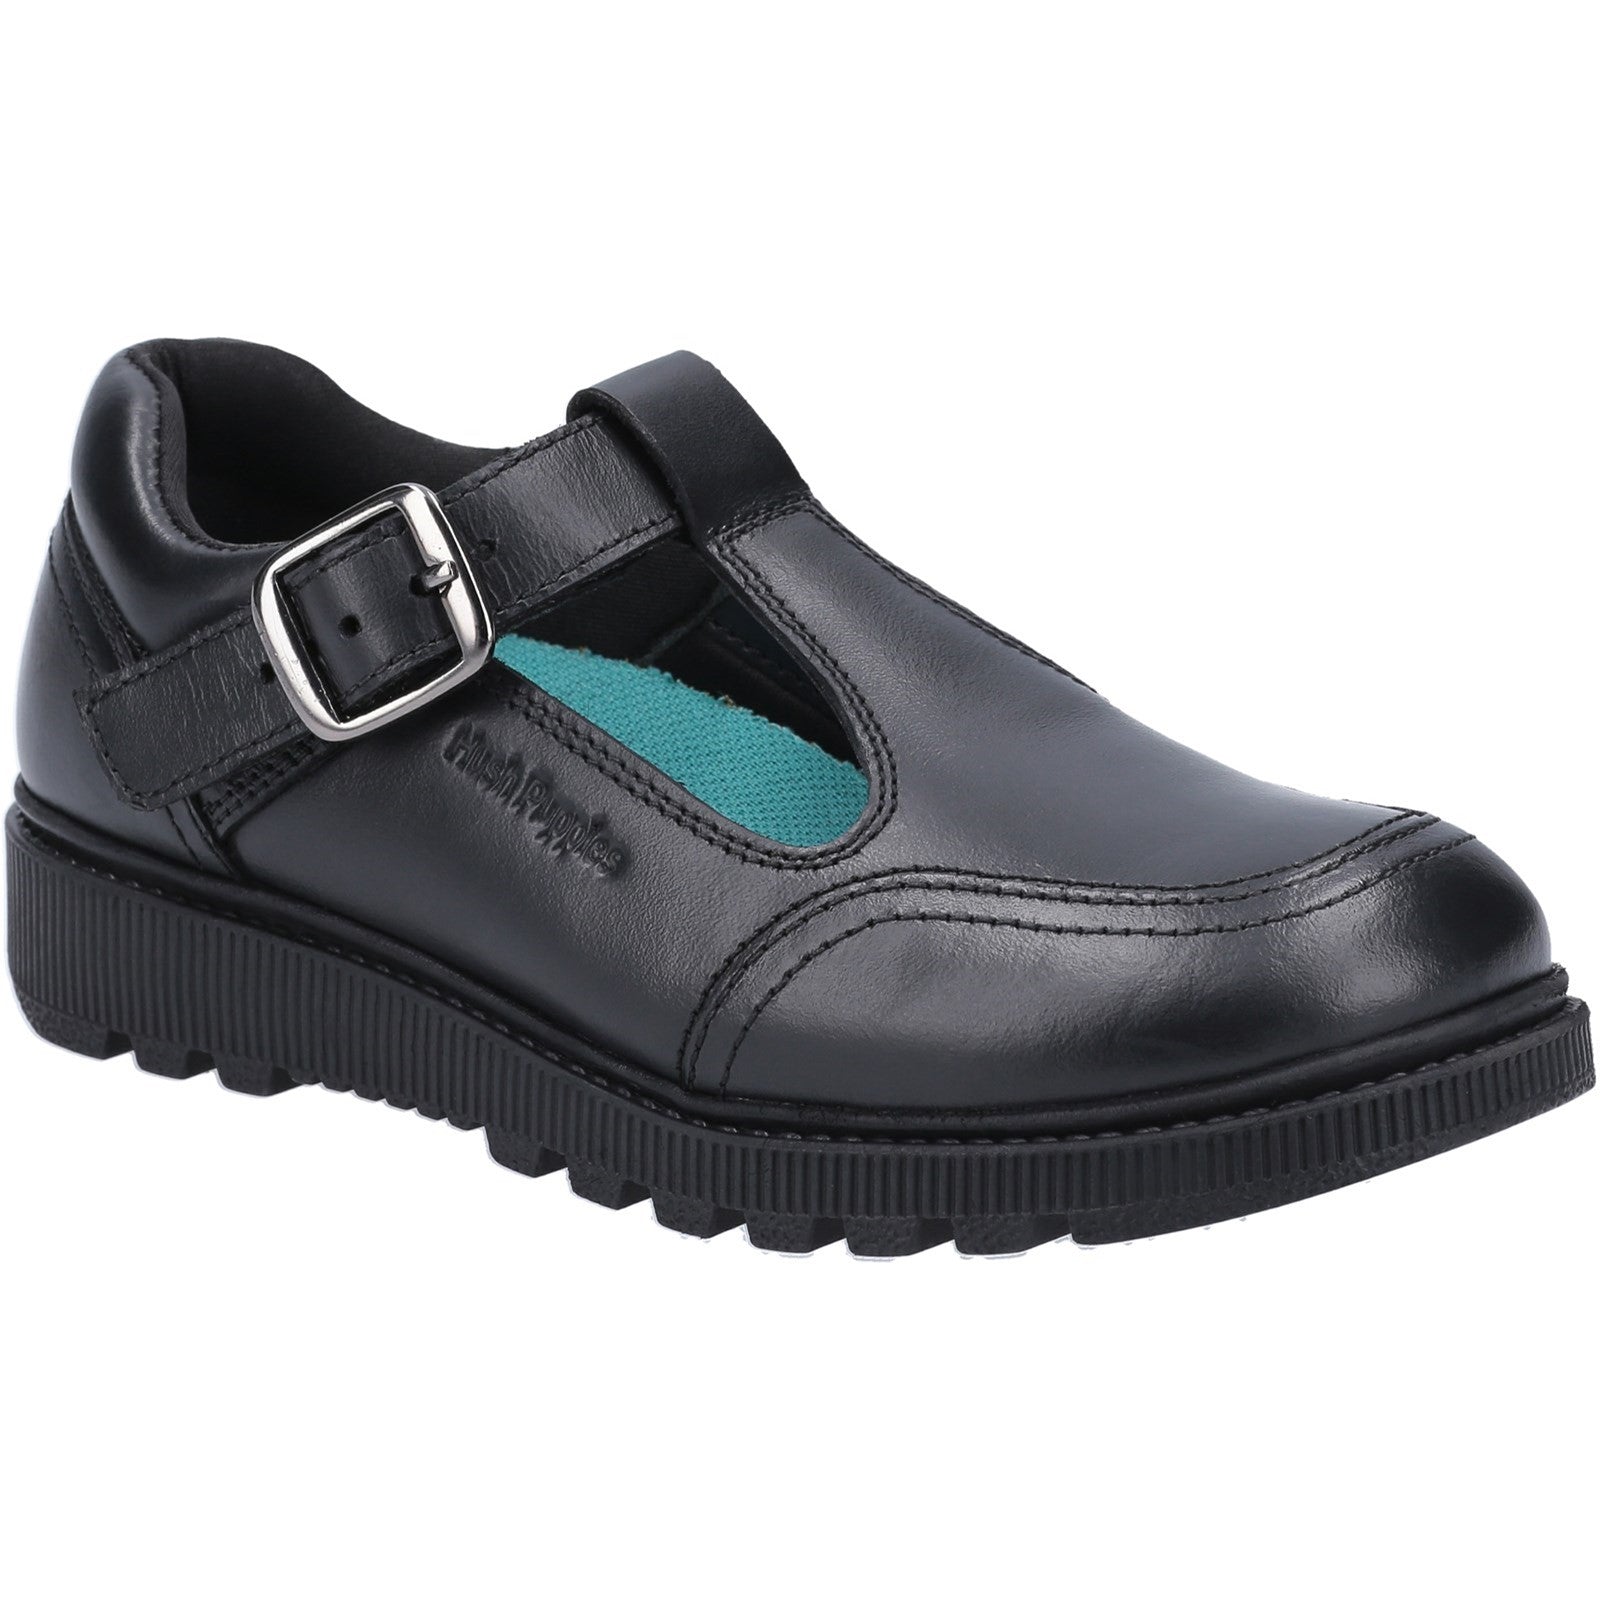 Hush Puppies Girls Kerry Leather School Shoes - Black